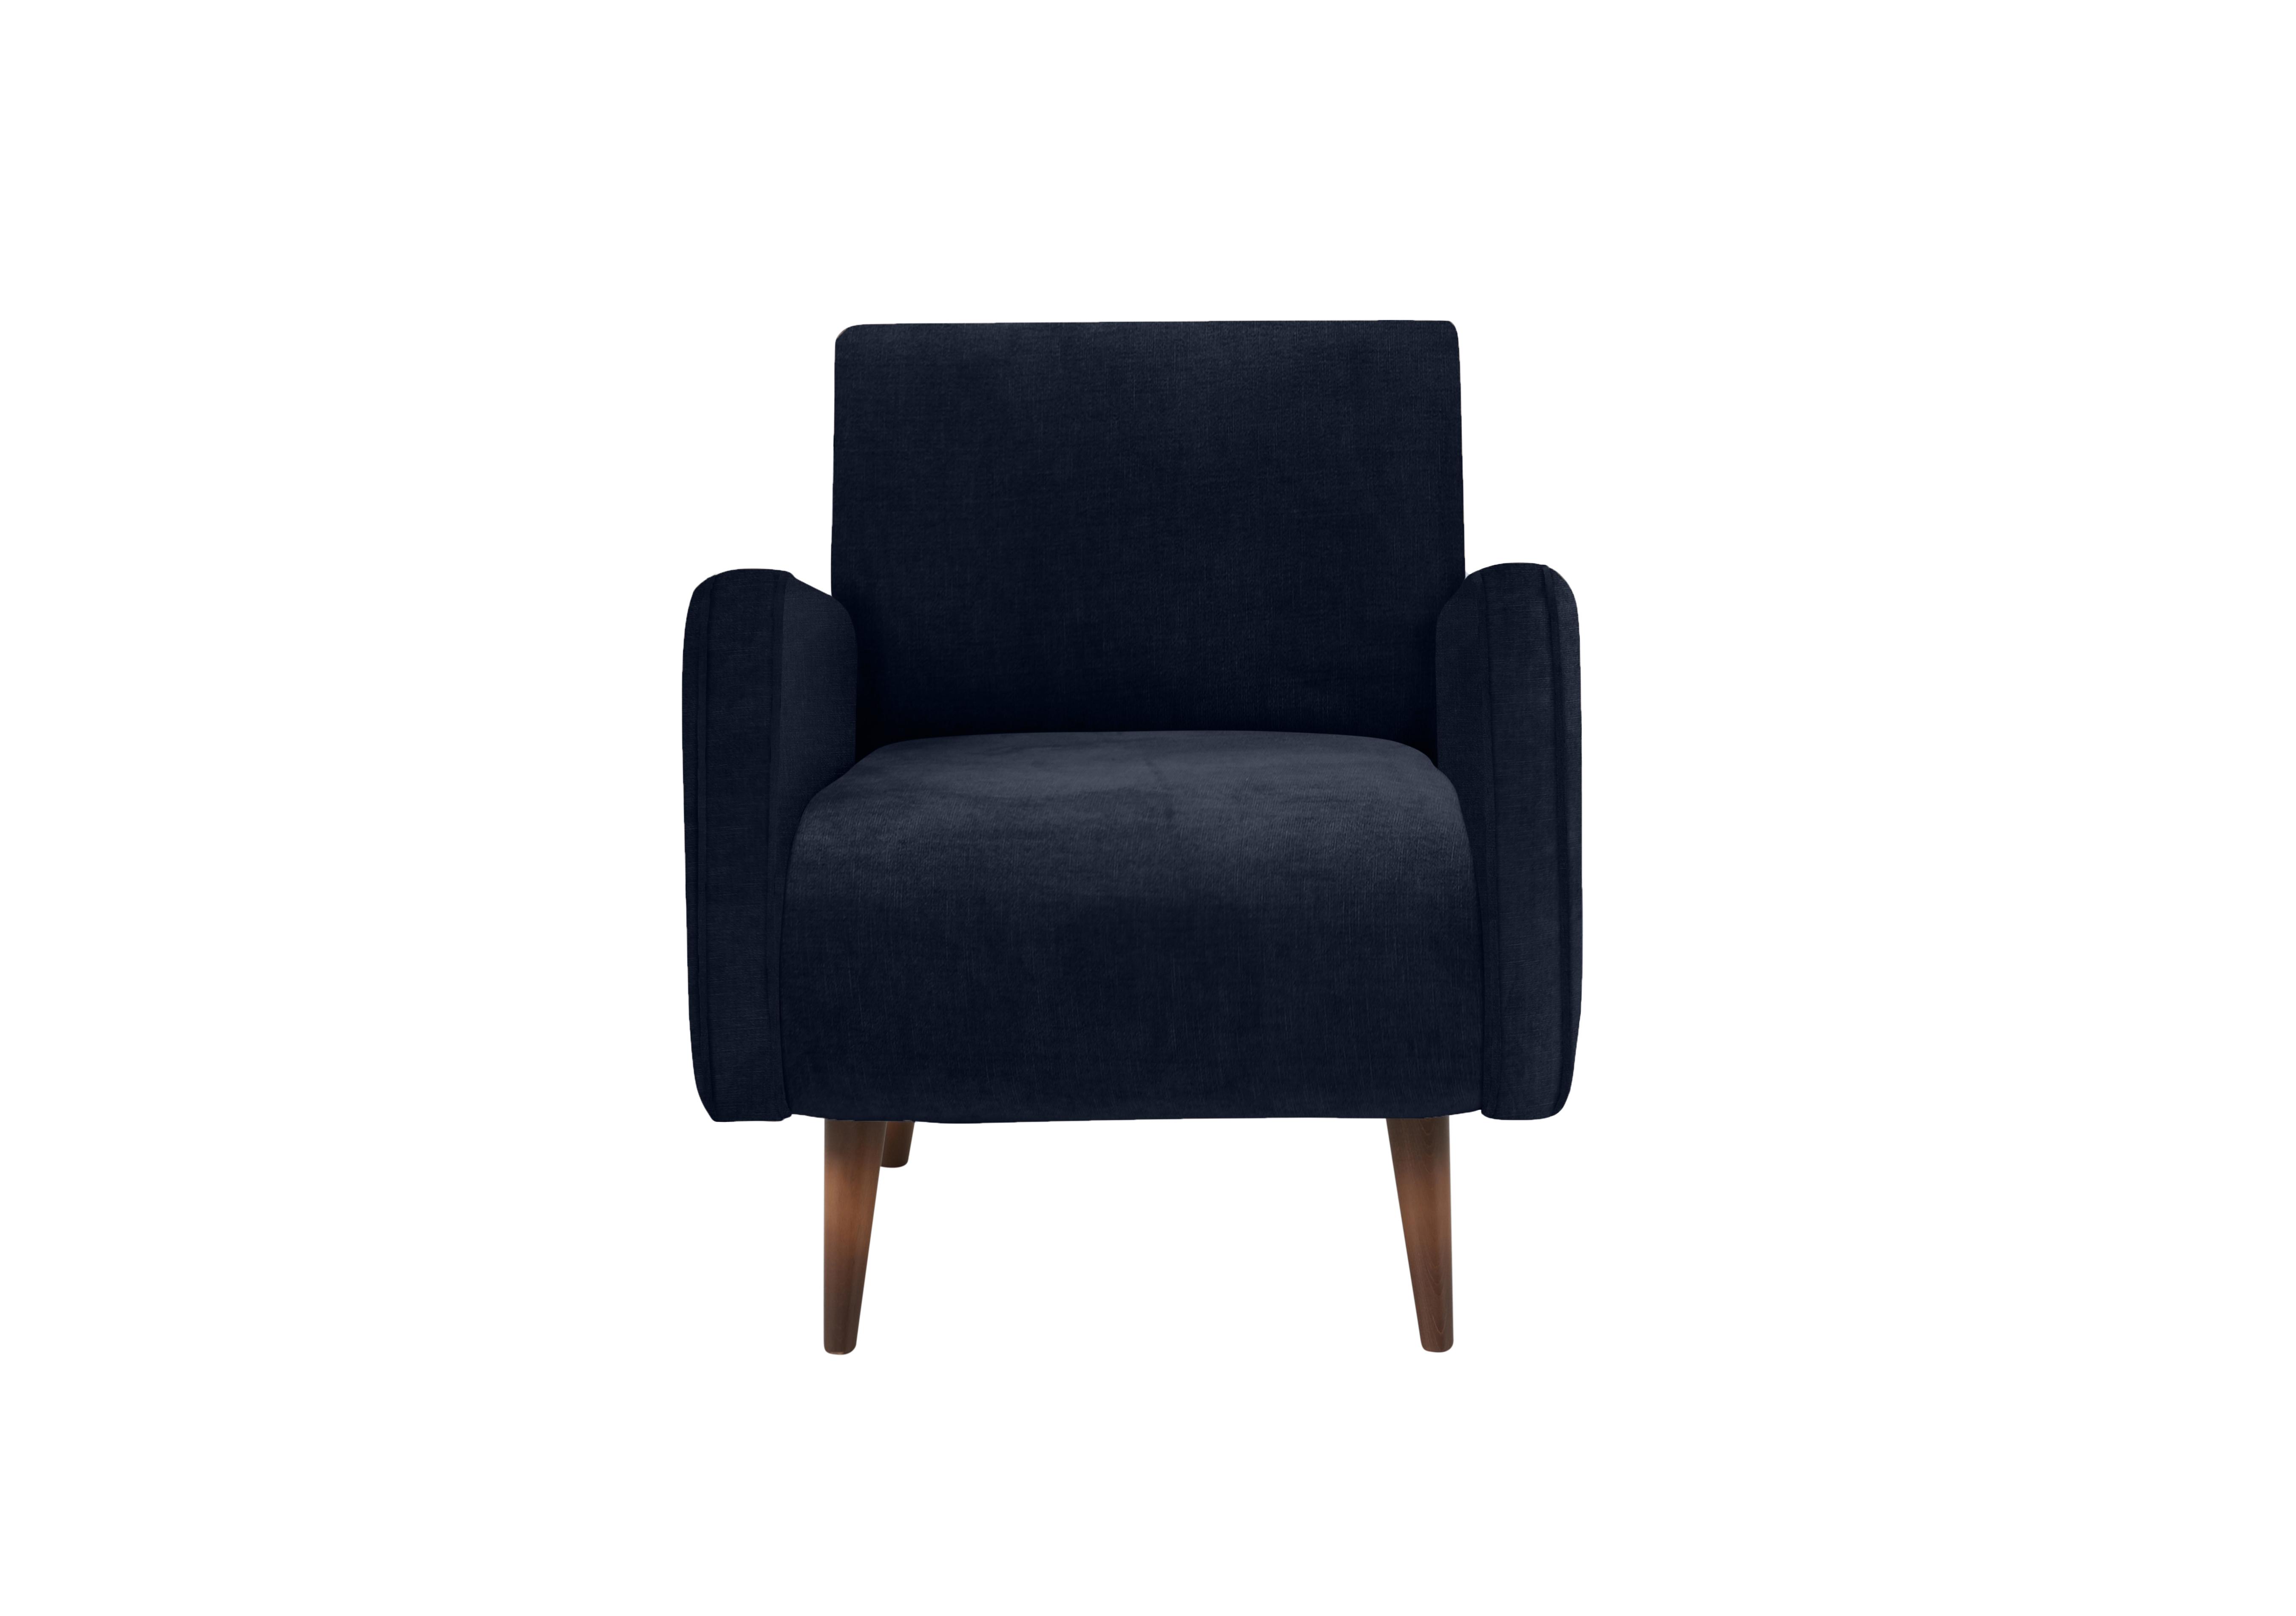 Sumptuous Fabric Accent Chair in Chamonix Navy Dk on Furniture Village